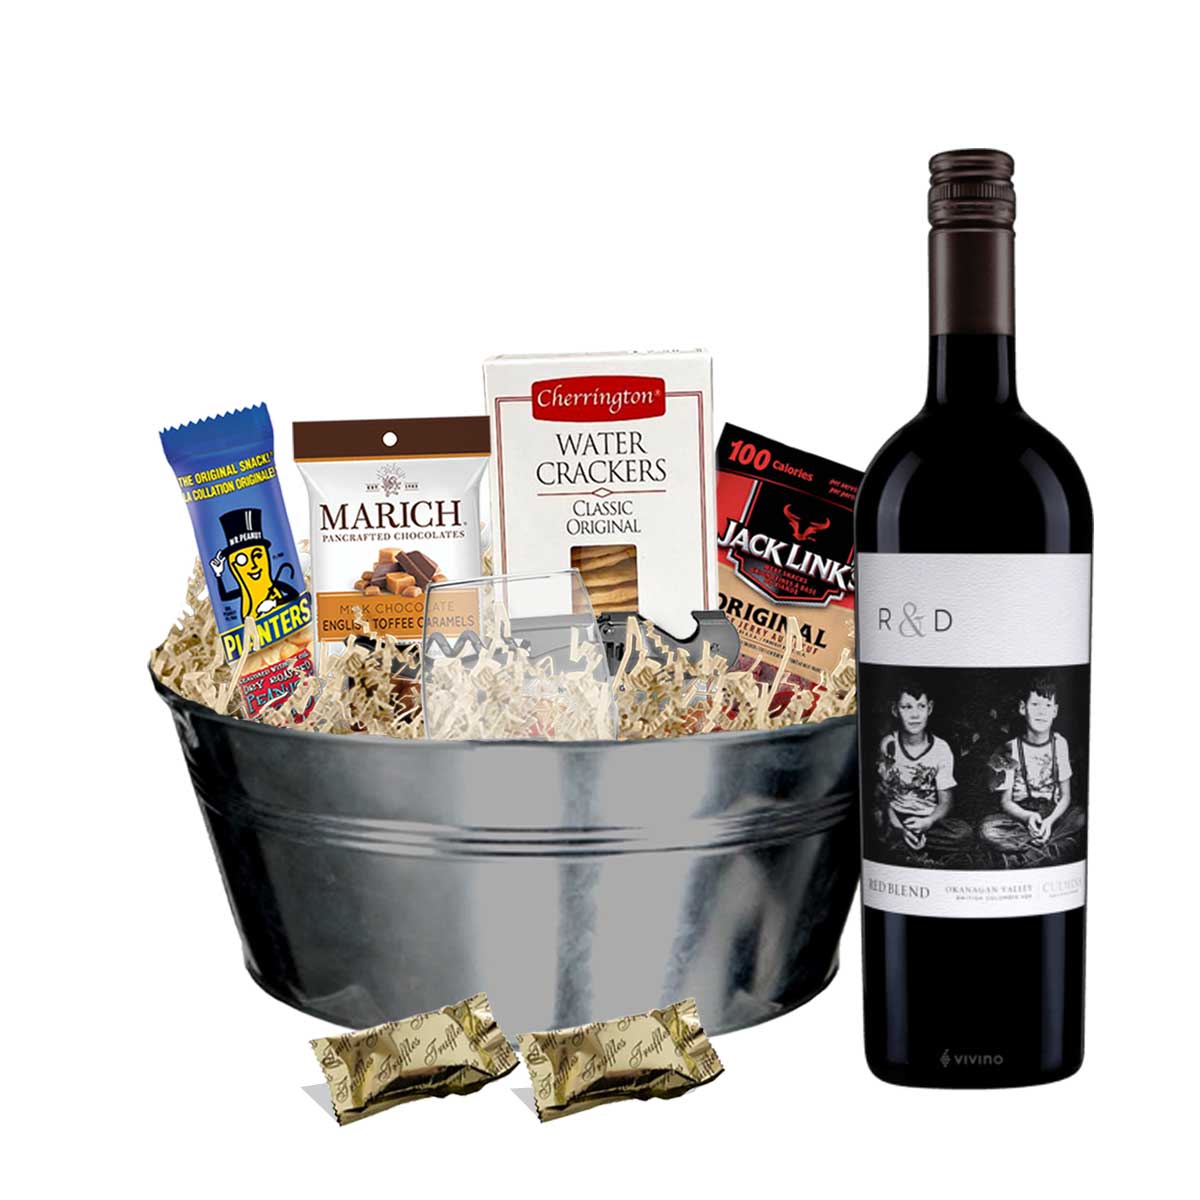 TAG Liquor Stores BC - Culmina R & D Red Blend 750ml Gift Basket